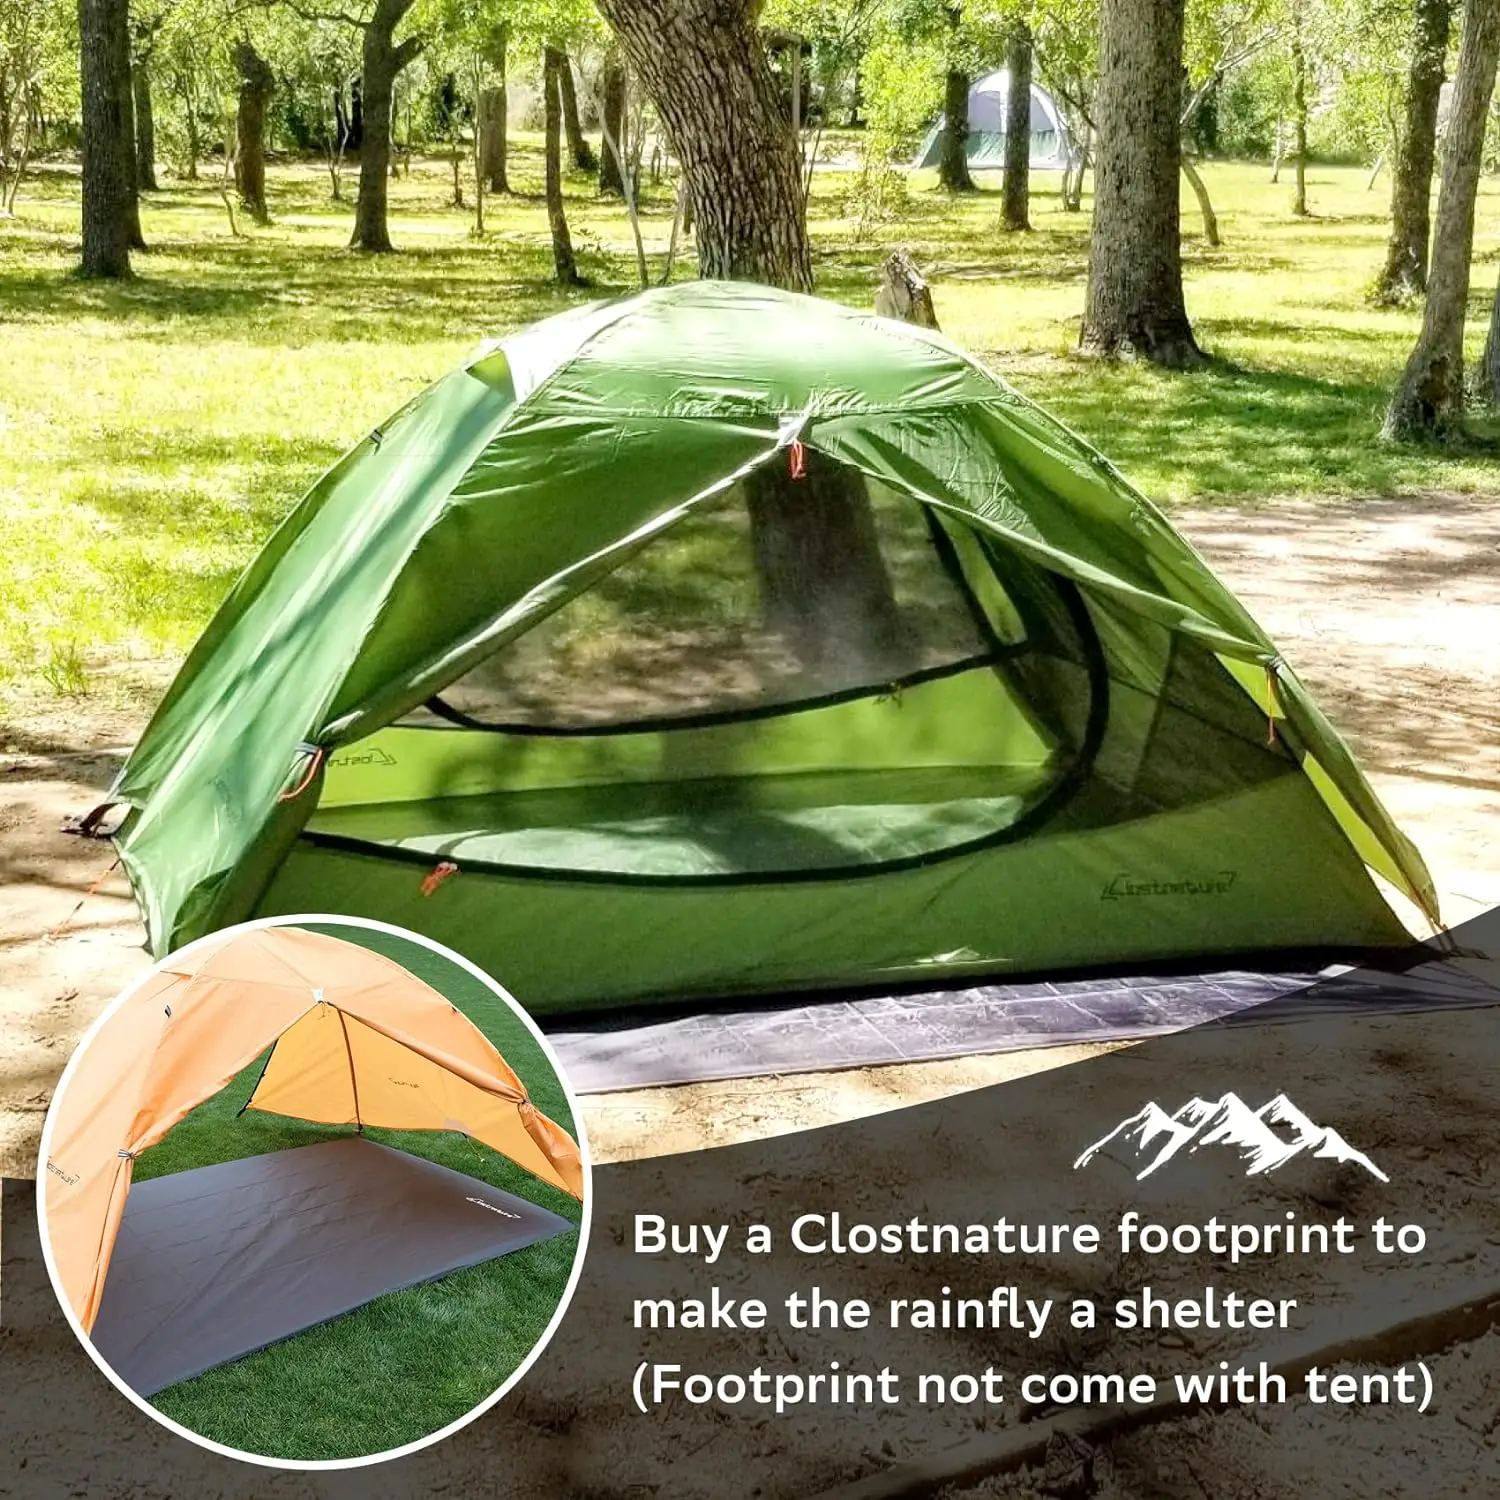 Clostnature Lightweight Backpacking Tent - 3 Season Ultralight Waterproof Camping Tent, Large Size Easy Setup Tent for Family, Outdoor, Hiking and Mountaineering